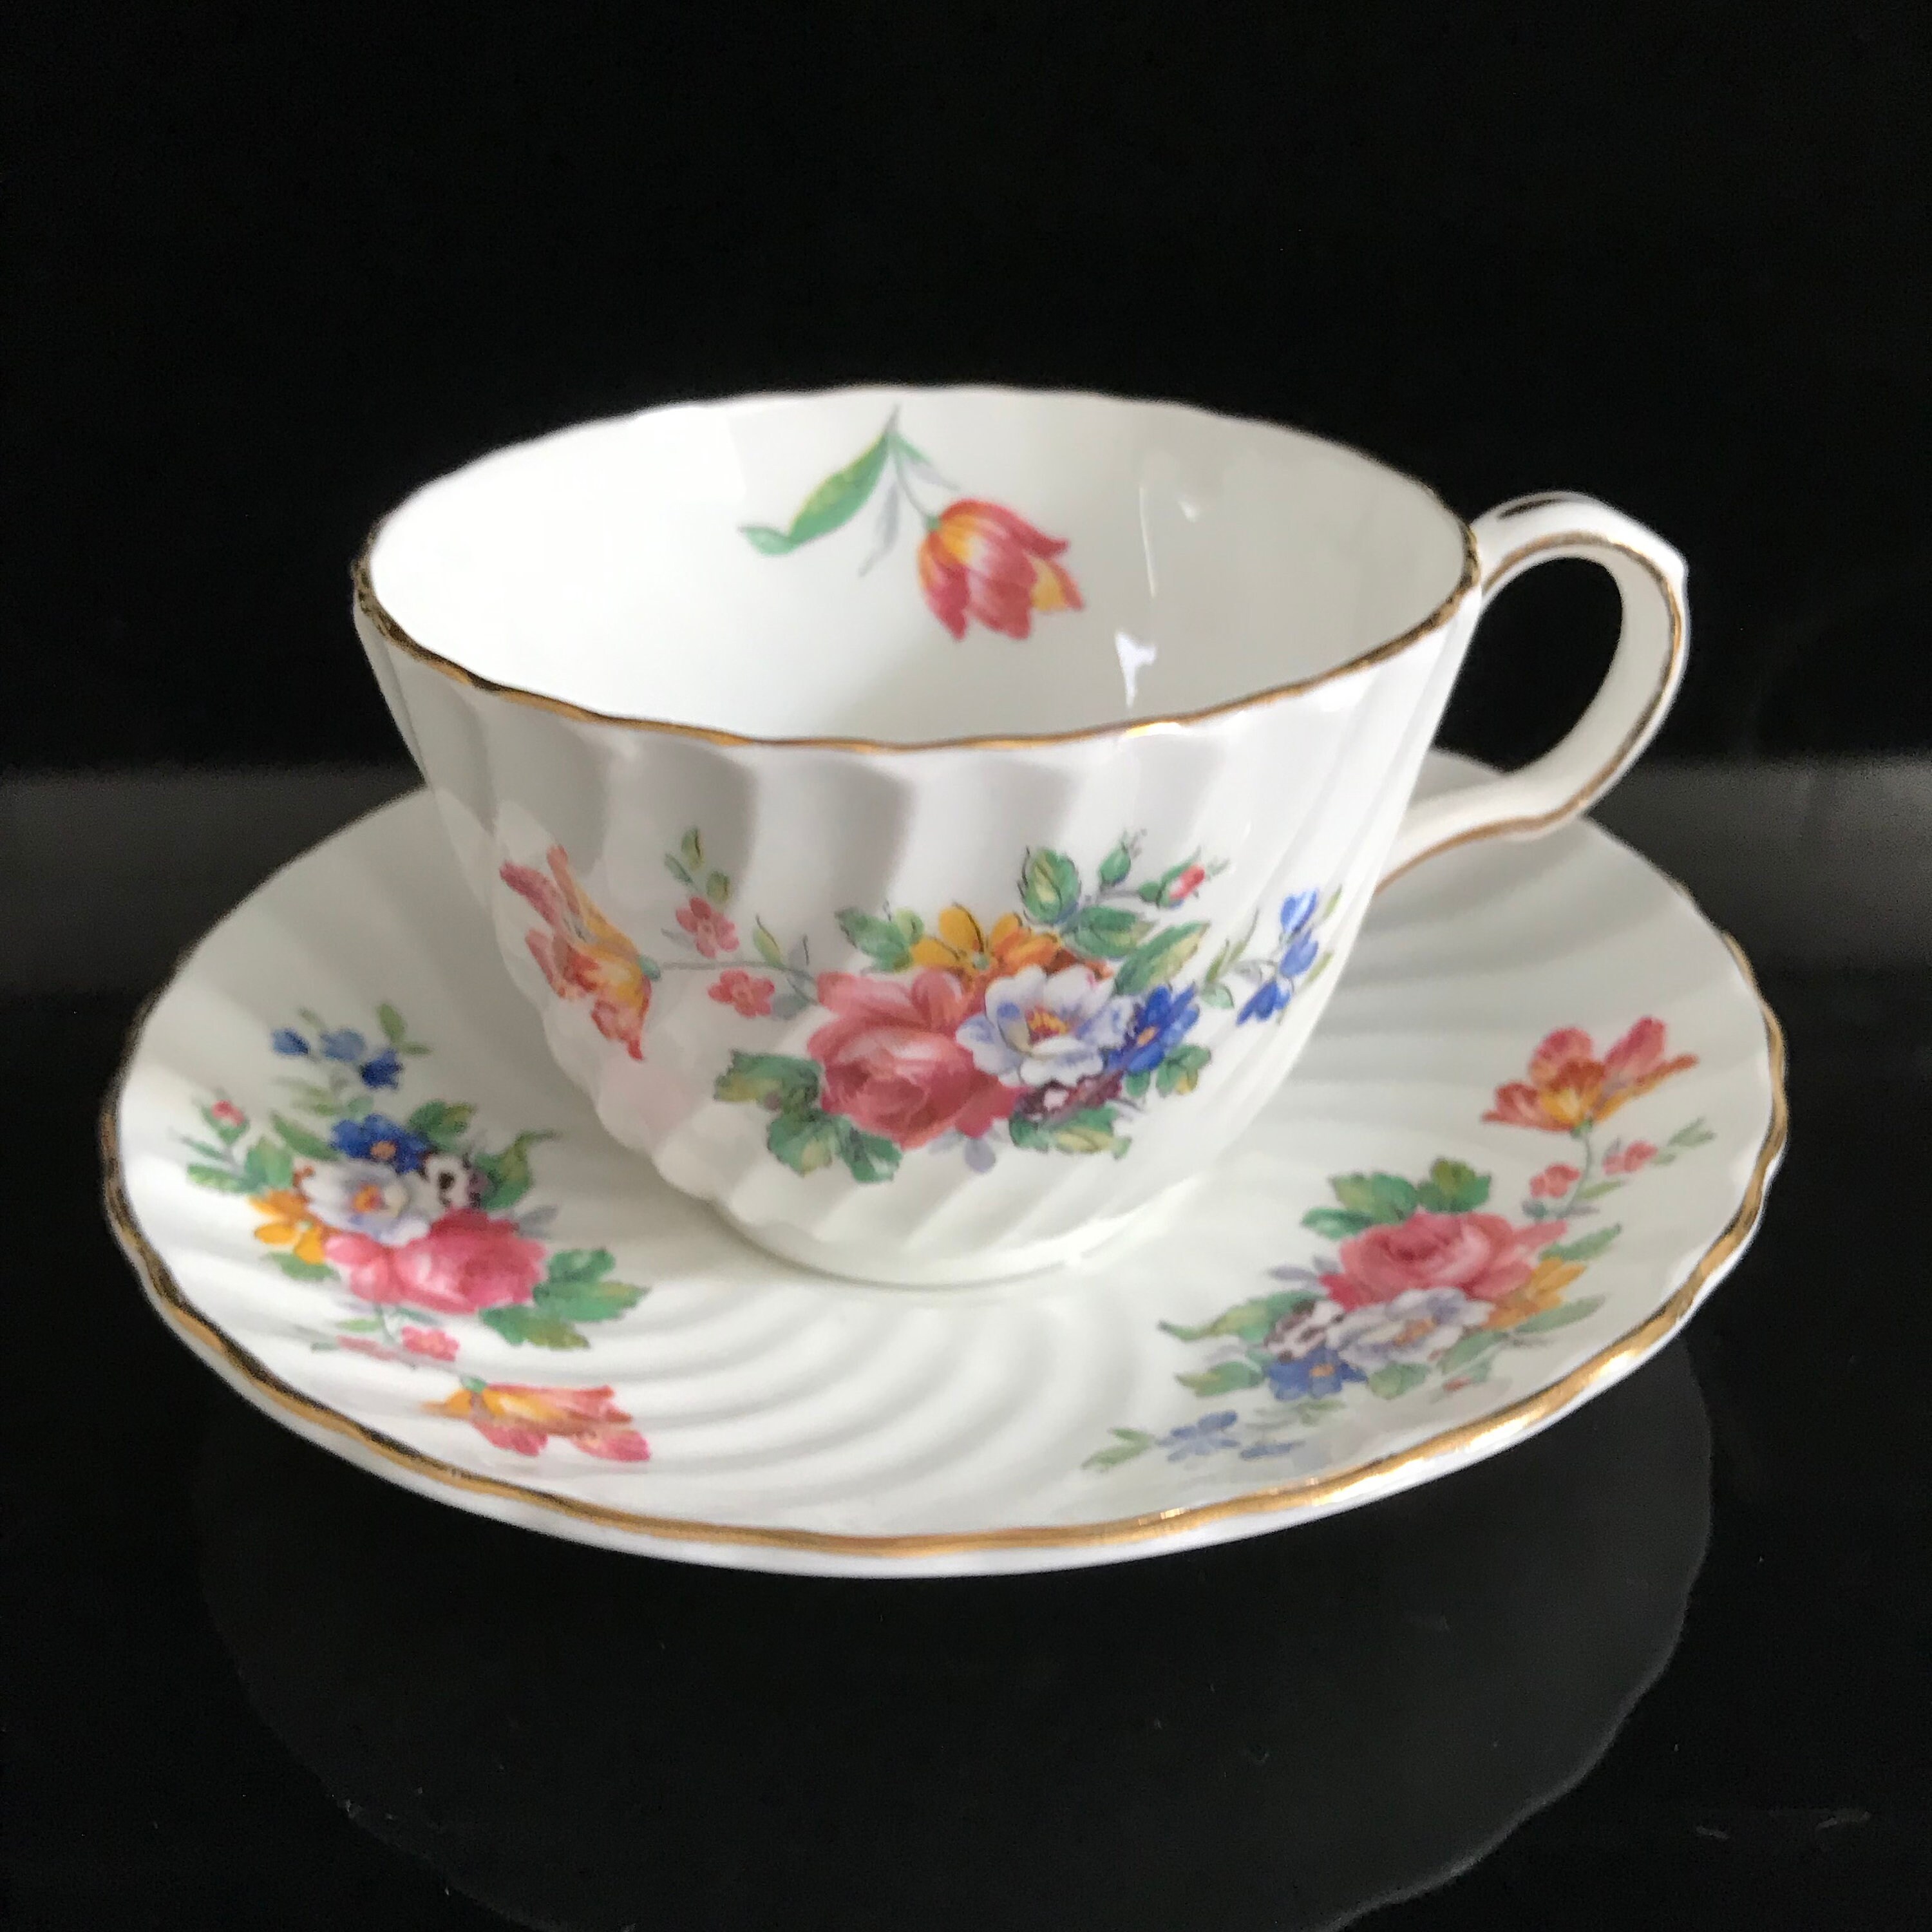 Ansley bone china cup vintage saucer made in England